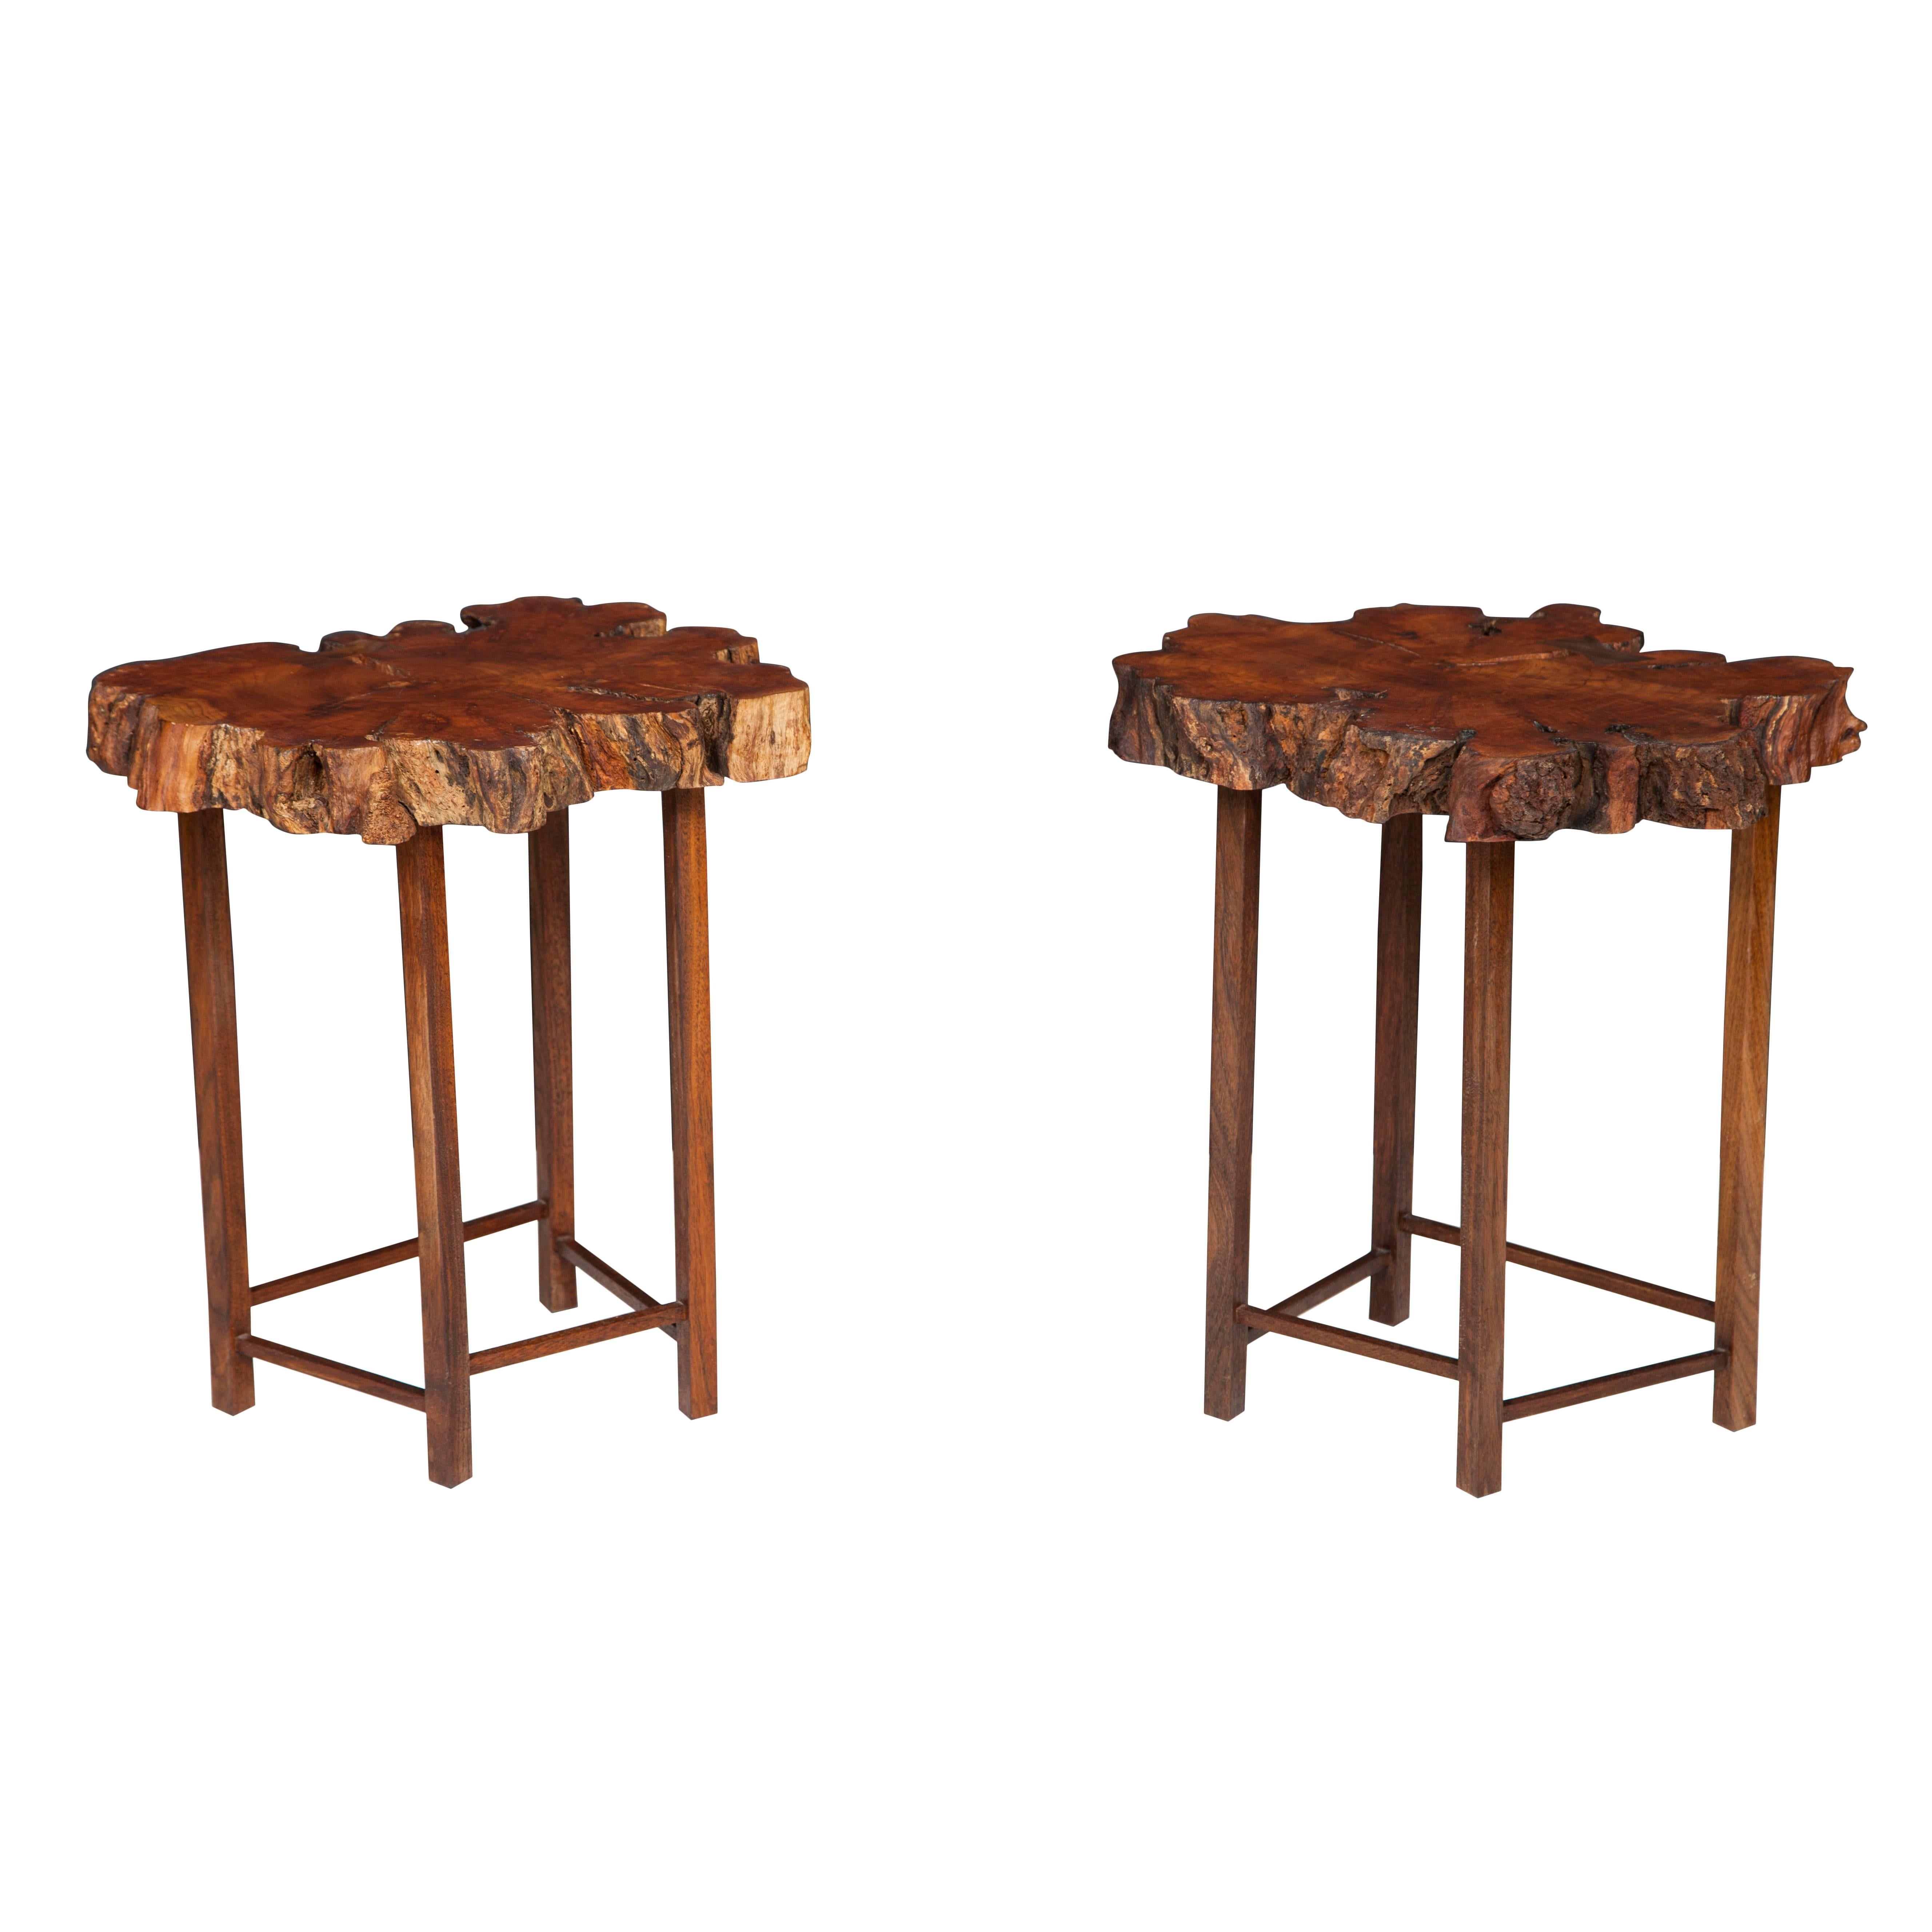 American Craftsman Burl Cherrybomb Tables by Don Howell, circa 2010 For Sale